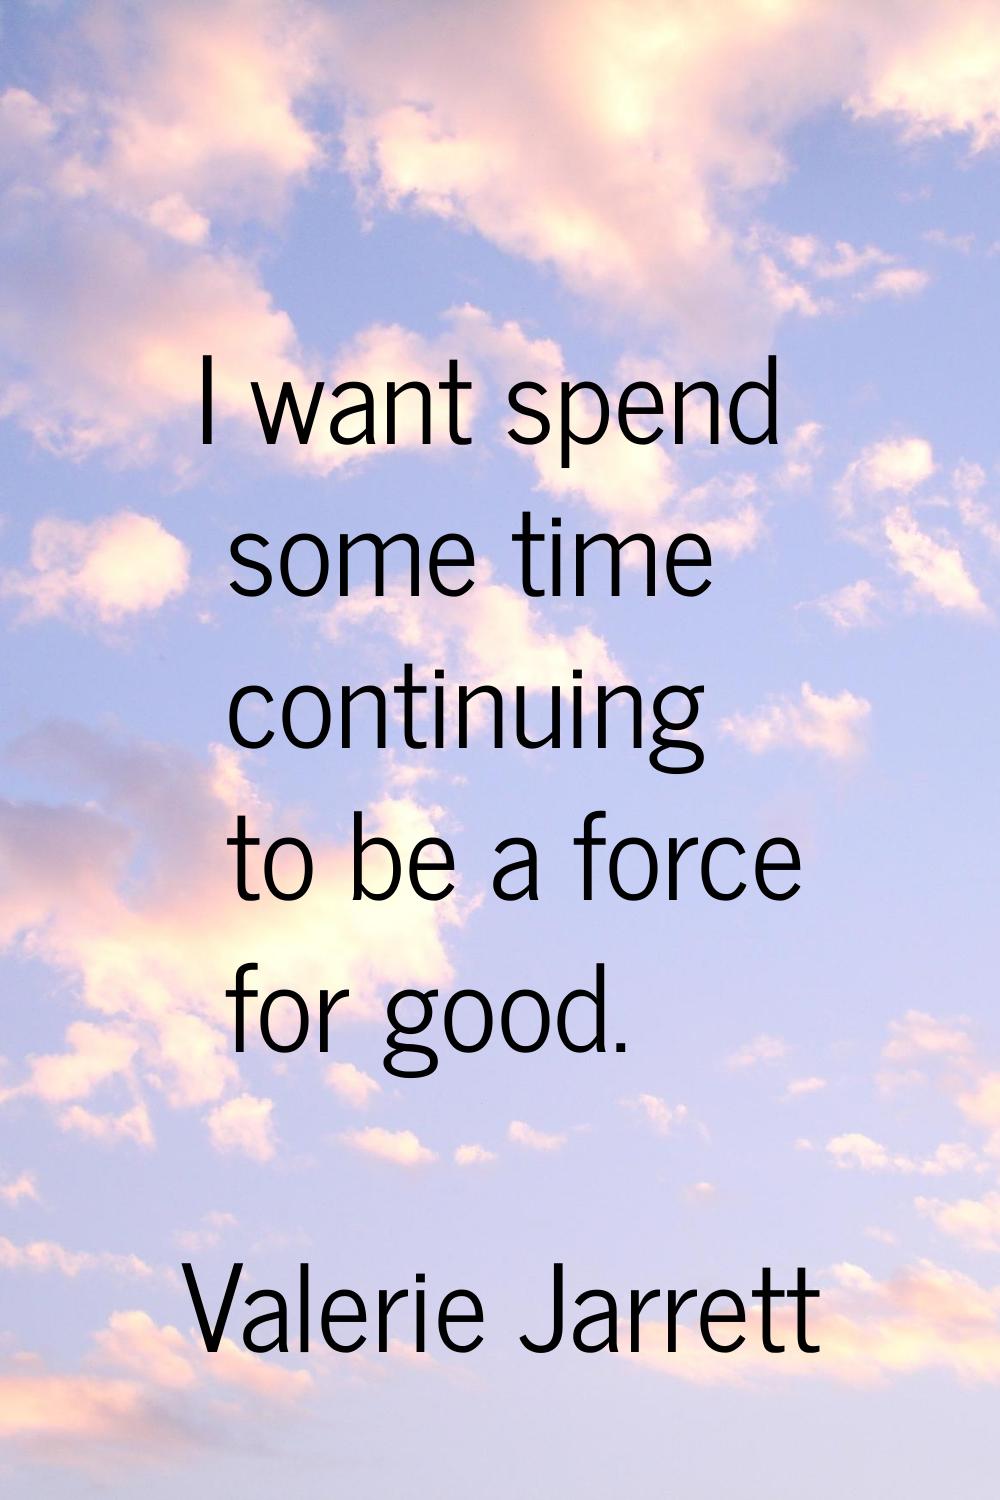 I want spend some time continuing to be a force for good.